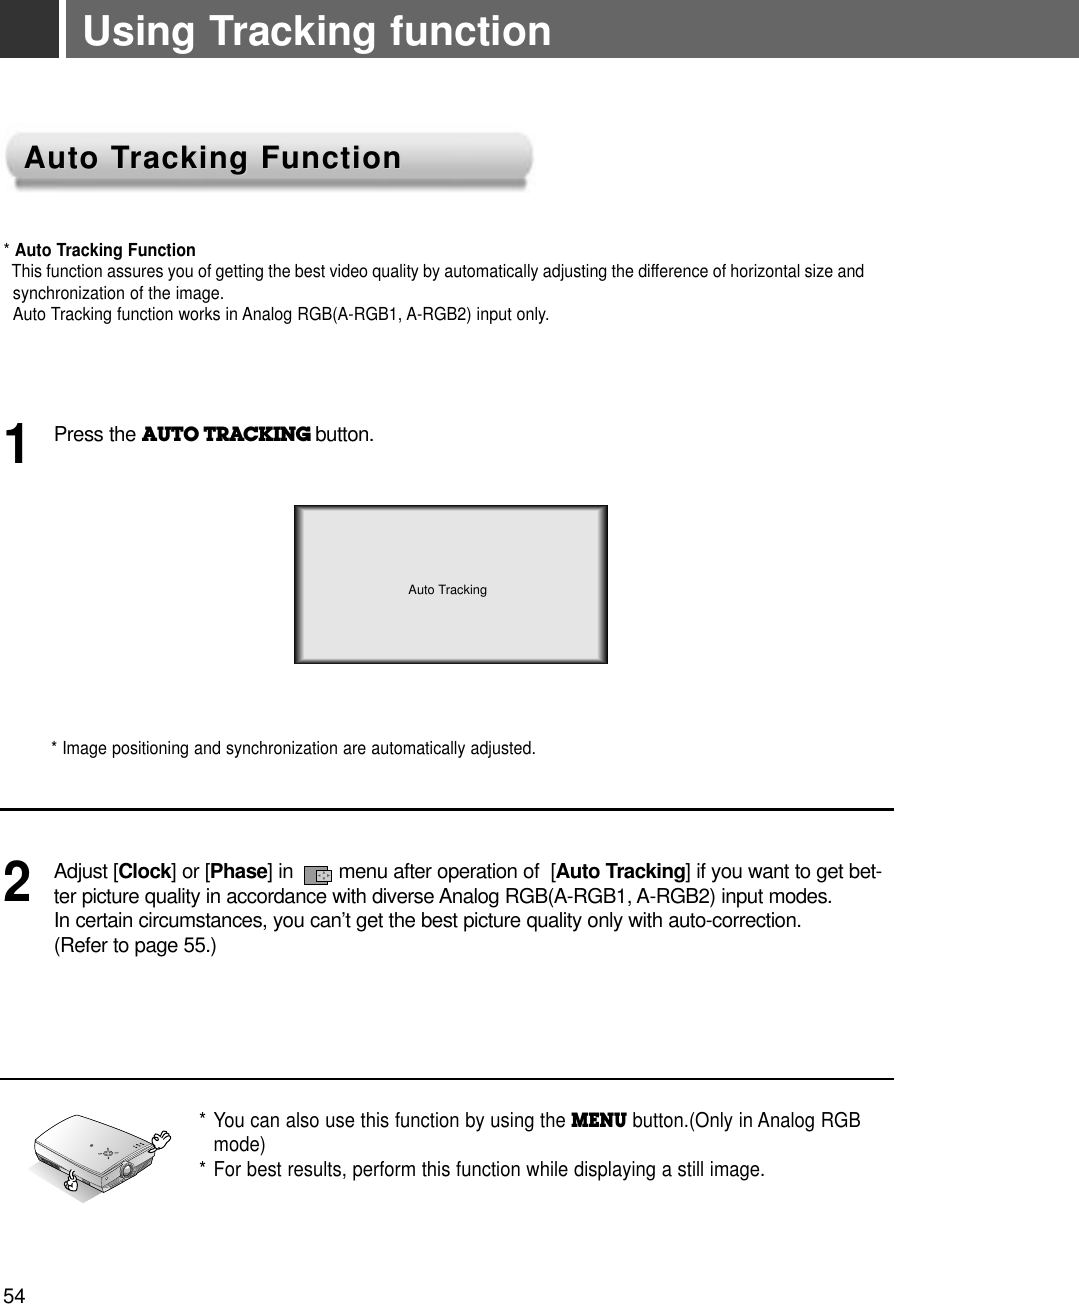 Using Tracking function* Auto Tracking FunctionThis function assures you of getting the best video quality by automatically adjusting the difference of horizontal size andsynchronization of the image. Auto Tracking function works in Analog RGB(A-RGB1, A-RGB2) input only.* Image positioning and synchronization are automatically adjusted.Press the AUTO TRACKING button.1Adjust [Clock] or [Phase] in        menu after operation of  [Auto Tracking] if you want to get bet-ter picture quality in accordance with diverse Analog RGB(A-RGB1, A-RGB2) input modes. In certain circumstances, you can’t get the best picture quality only with auto-correction.(Refer to page 55.)2* You can also use this function by using the MENU button.(Only in Analog RGB mode)* For best results, perform this function while displaying a still image.RAuto TrackingAuto TAuto Tracking Functionracking Function54